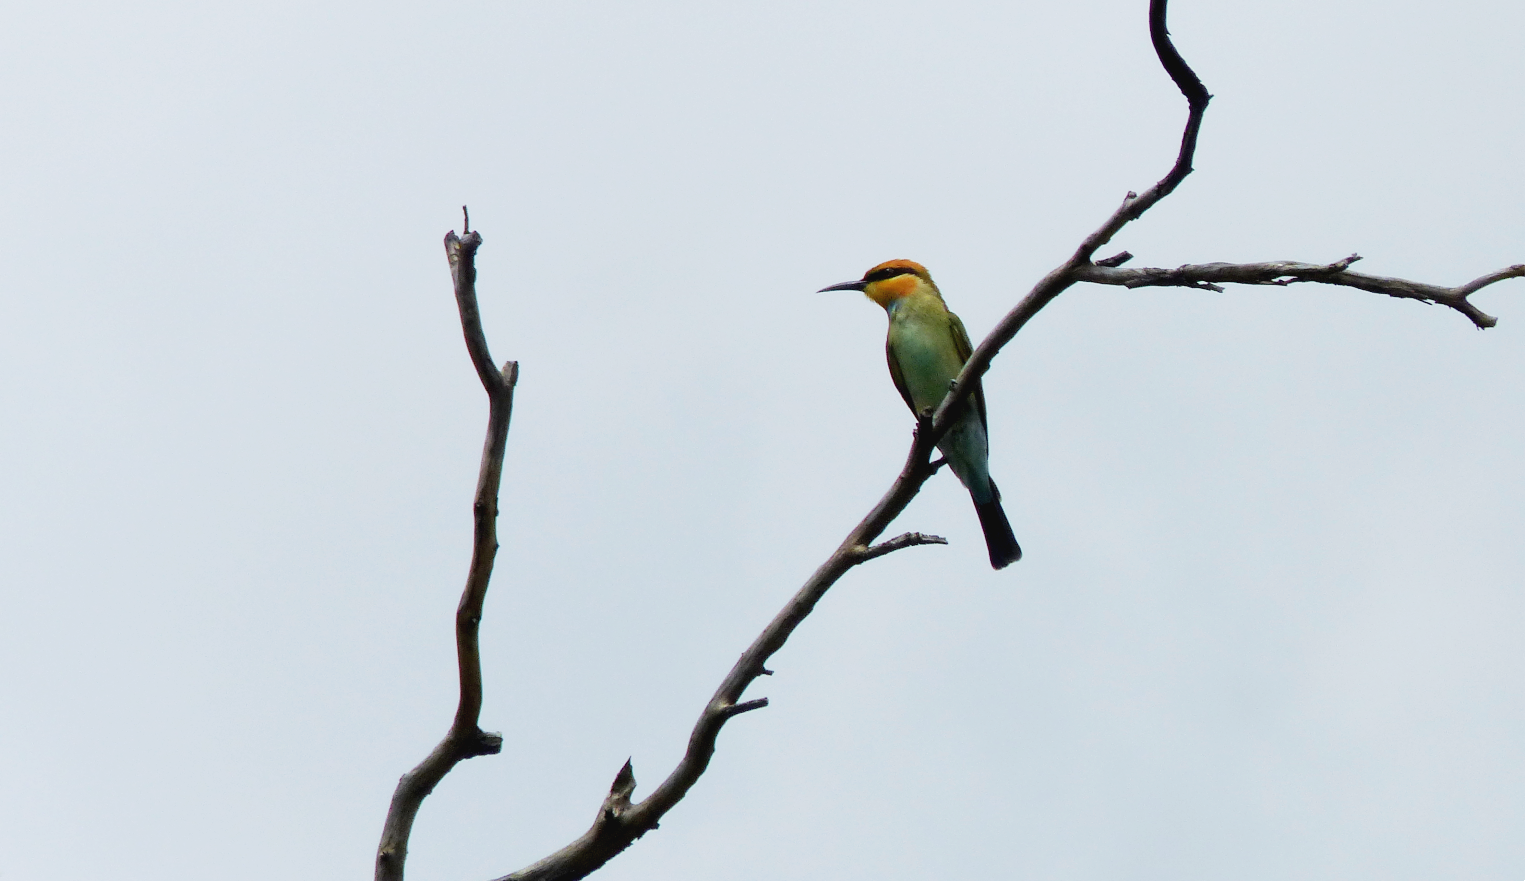 Figure 2: A Rainbow bee-eater, a native bird species to Australia perched on a forking branch with a grey sky in the background.